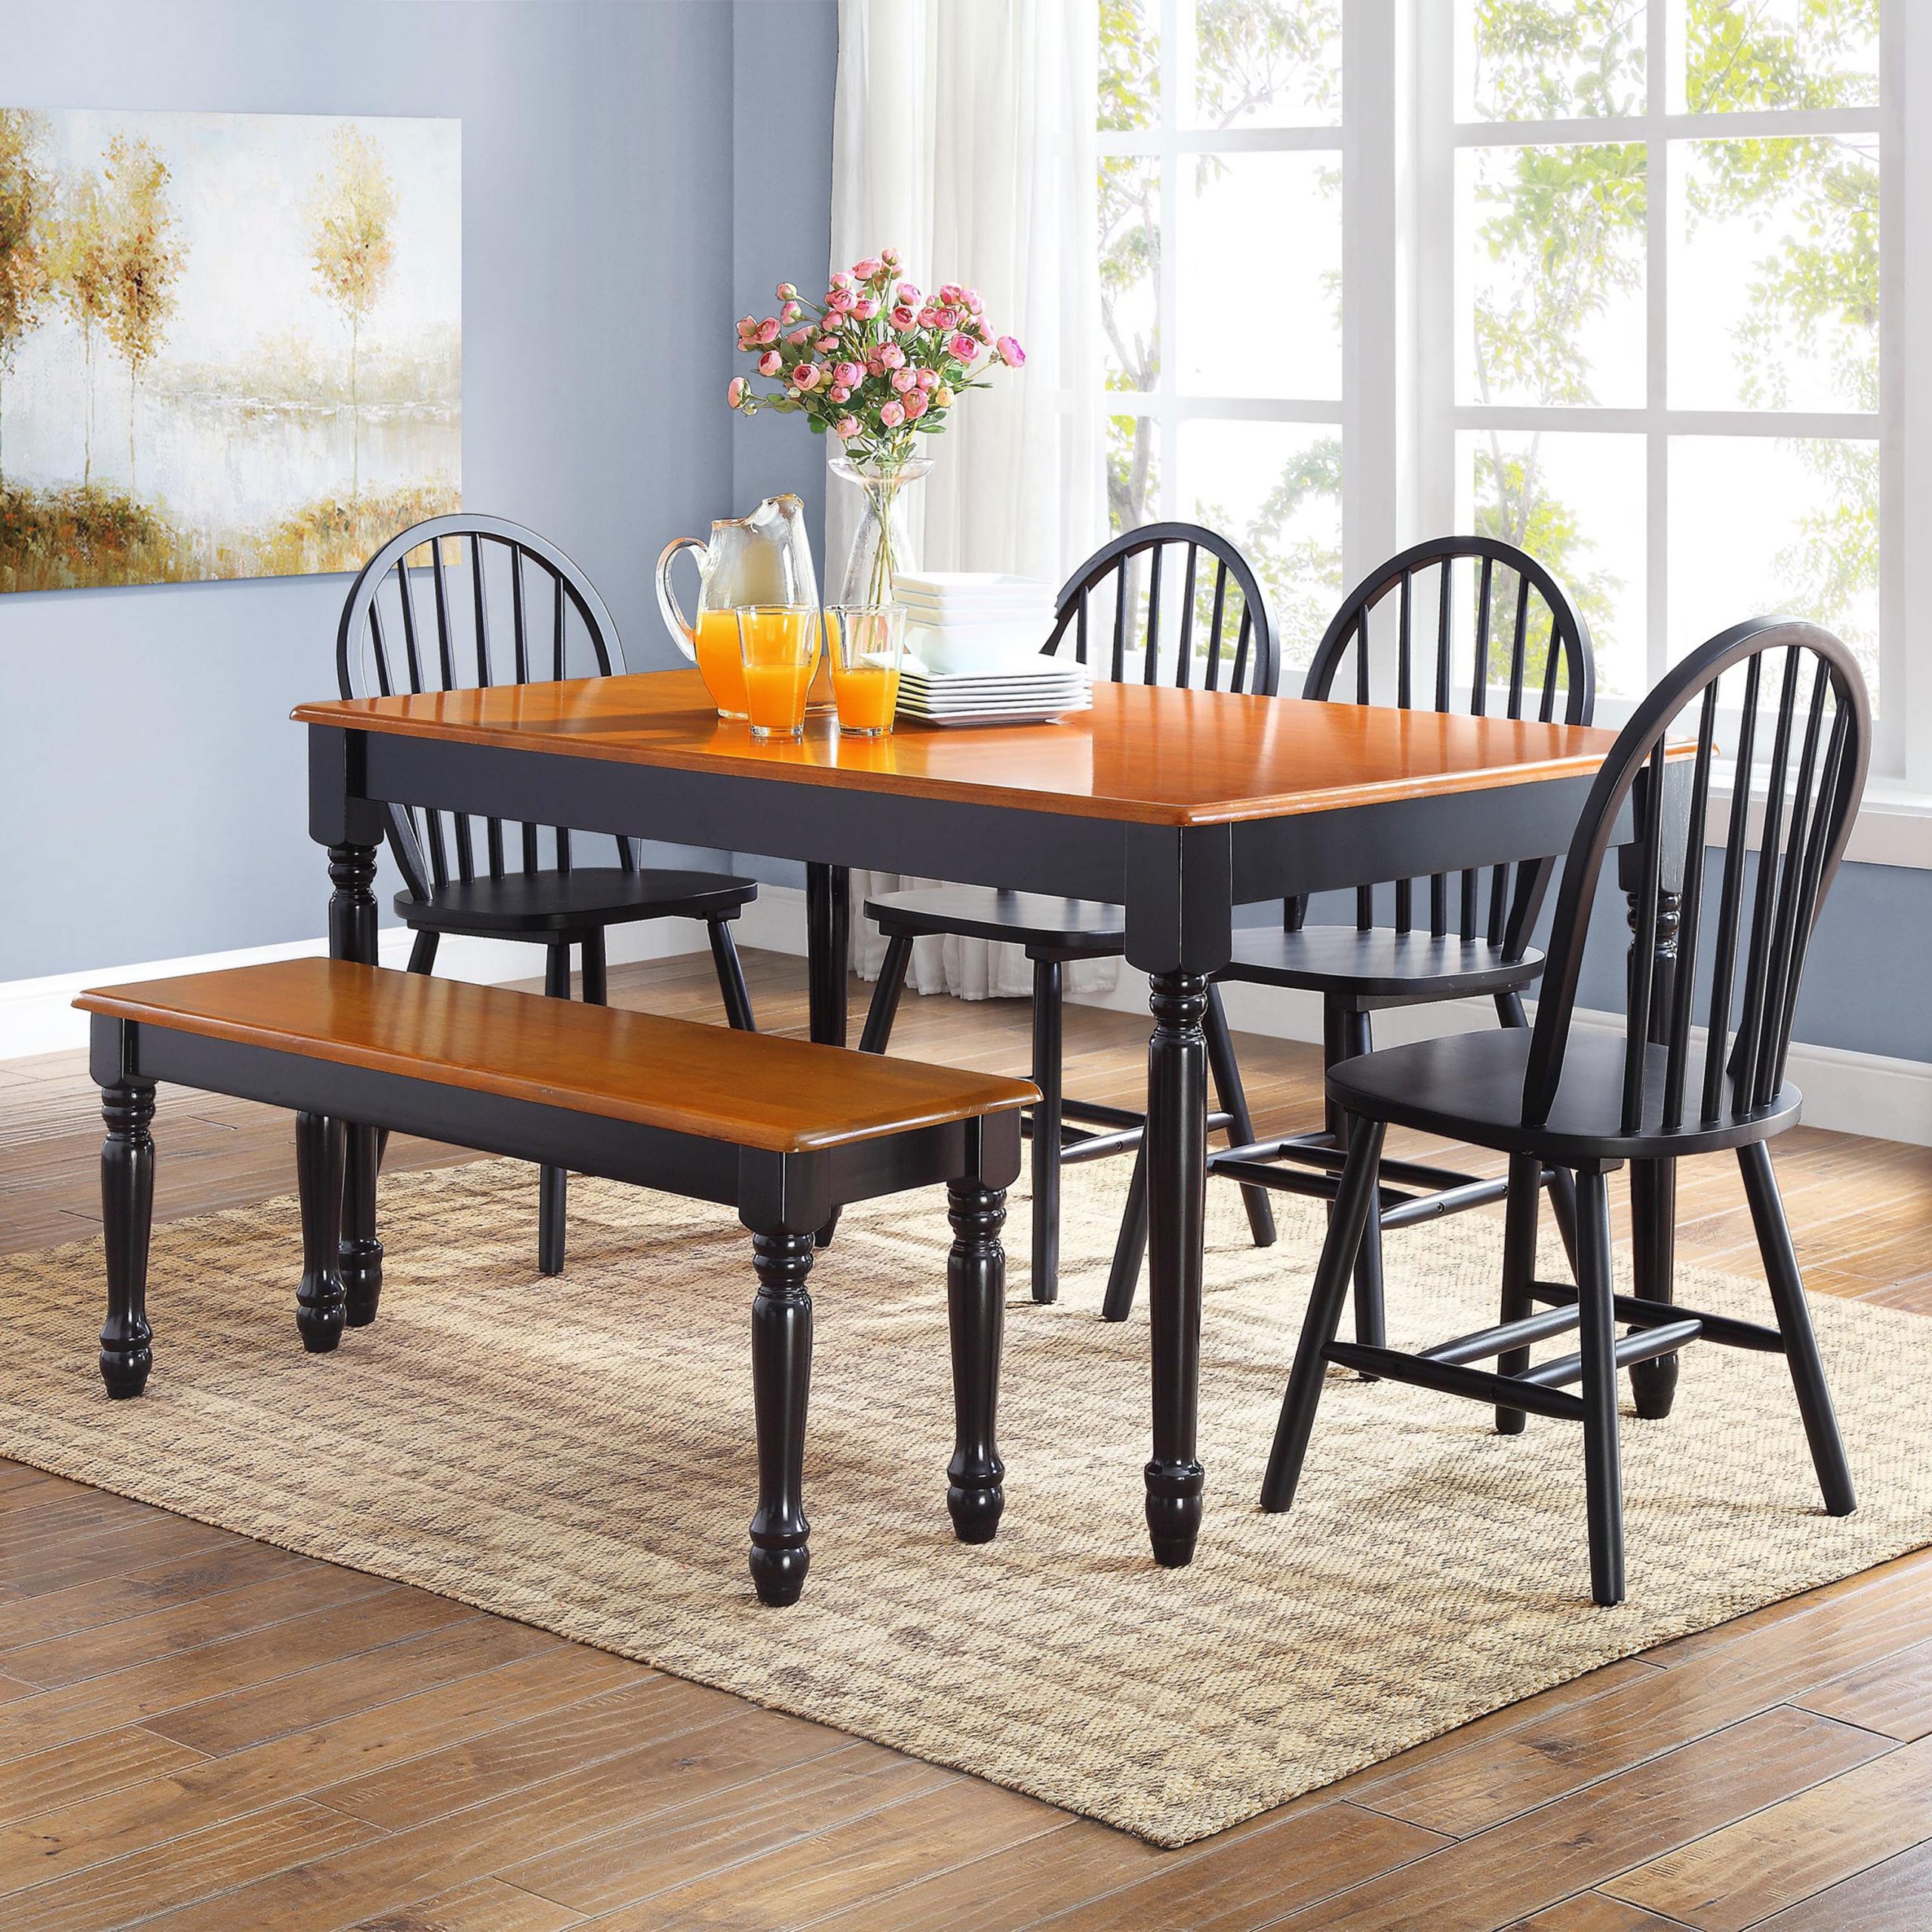 Dining Table Autumn Lane Farmhouse Kitchen Furniture Home Solid Wood Sturdy Offi 